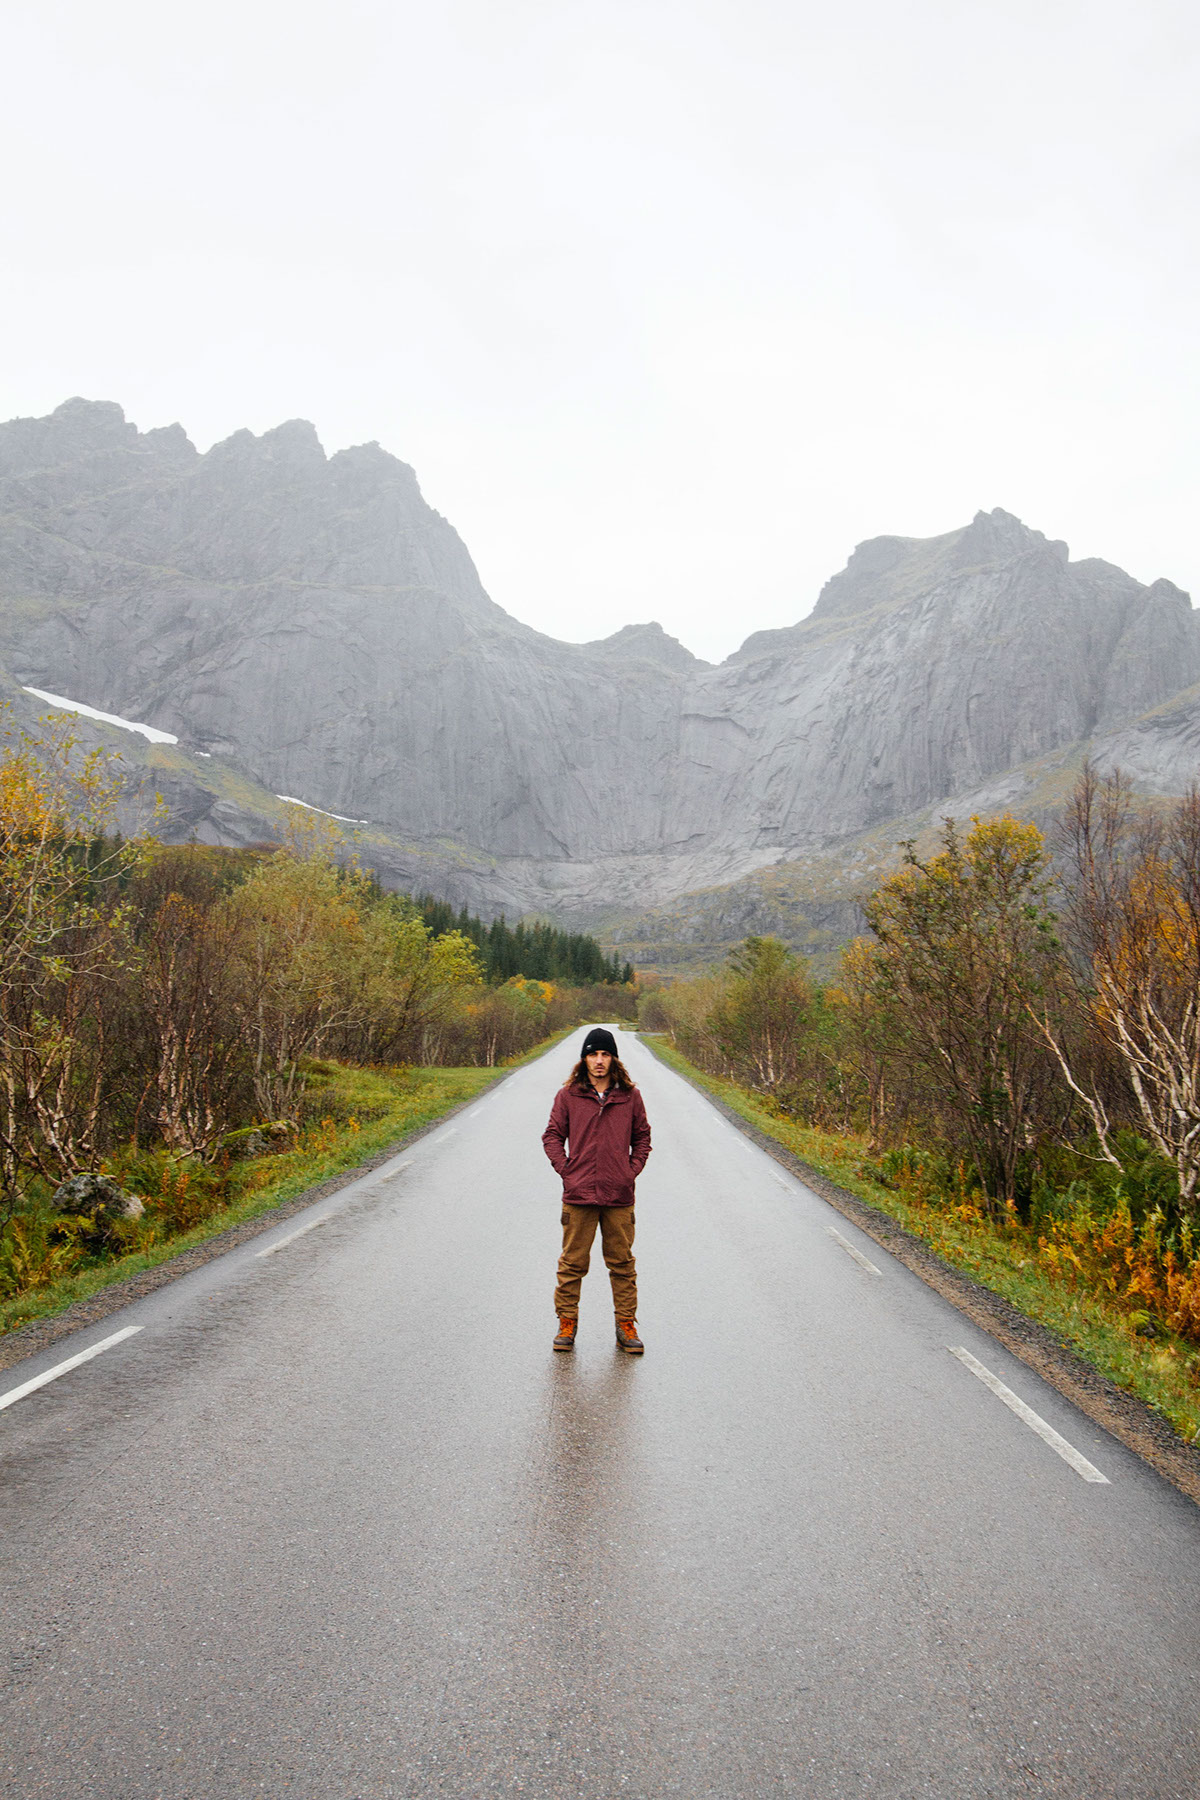 norway Travel landscapes beauty RoadTrip creative photo editorial model men Nature wild Norge